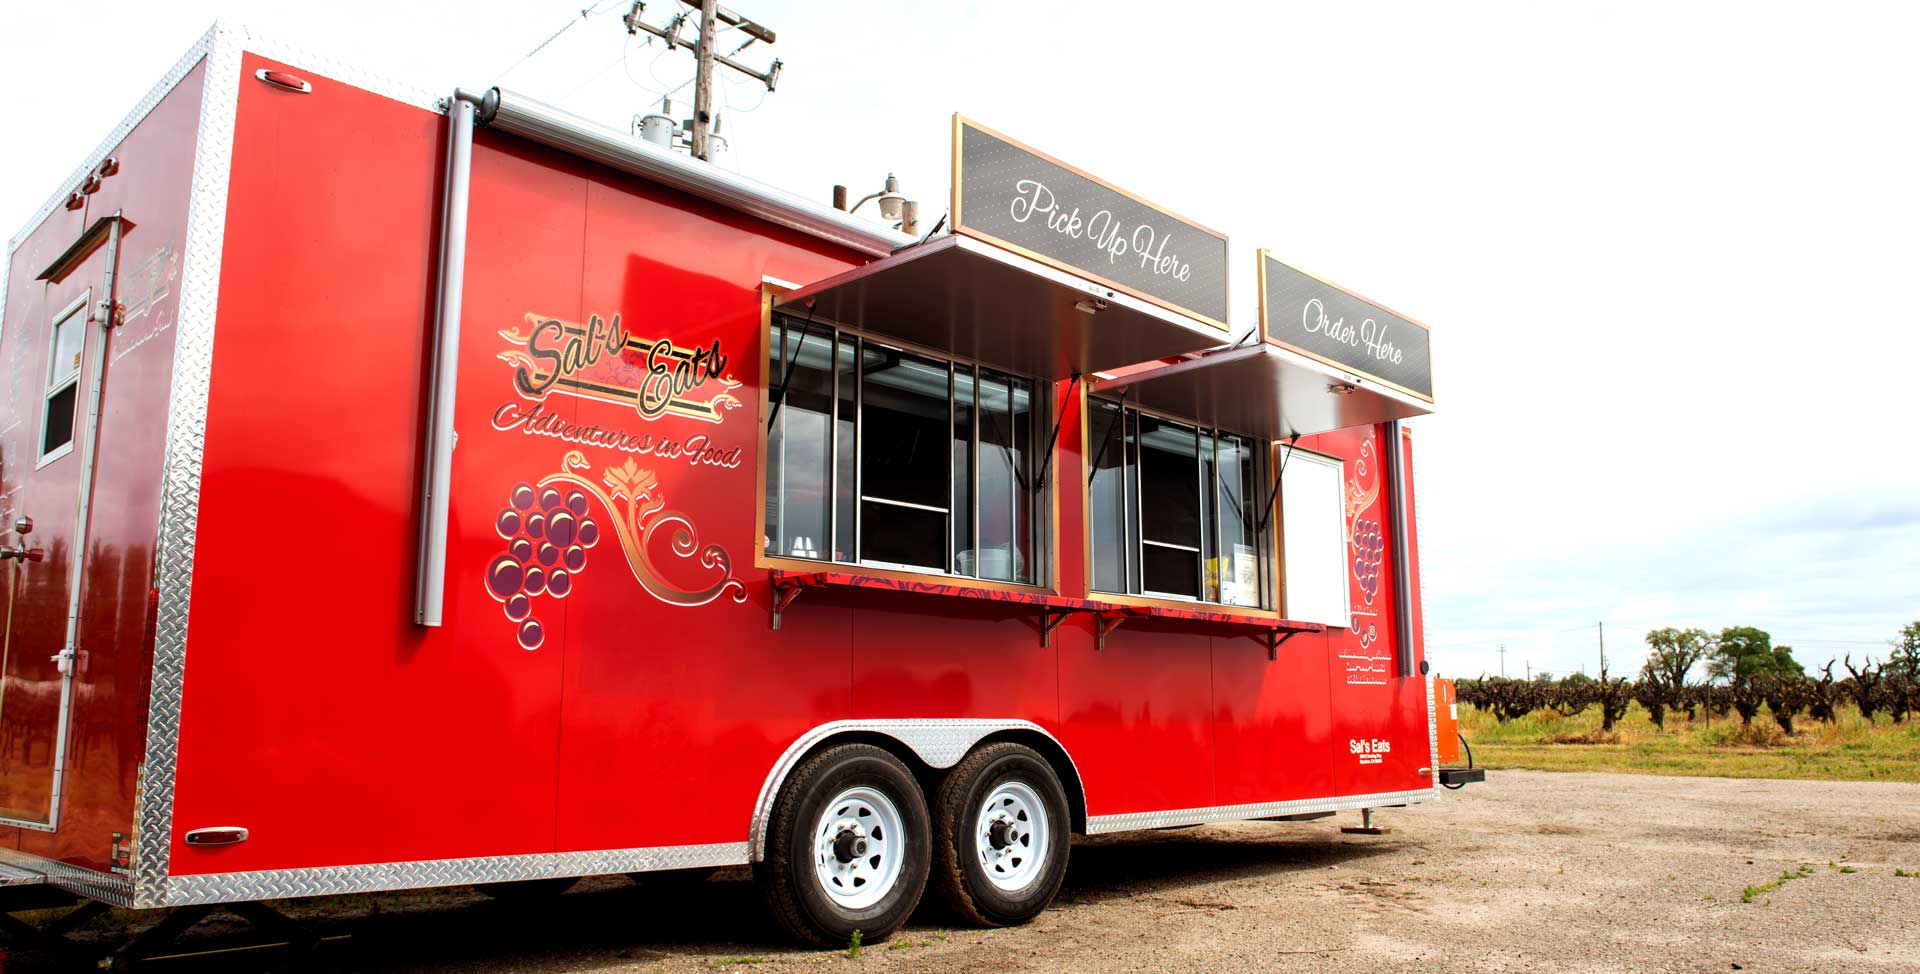 Event Catering Company & Mobile Kitchen in Lodi - Sal's eats food truck catering company